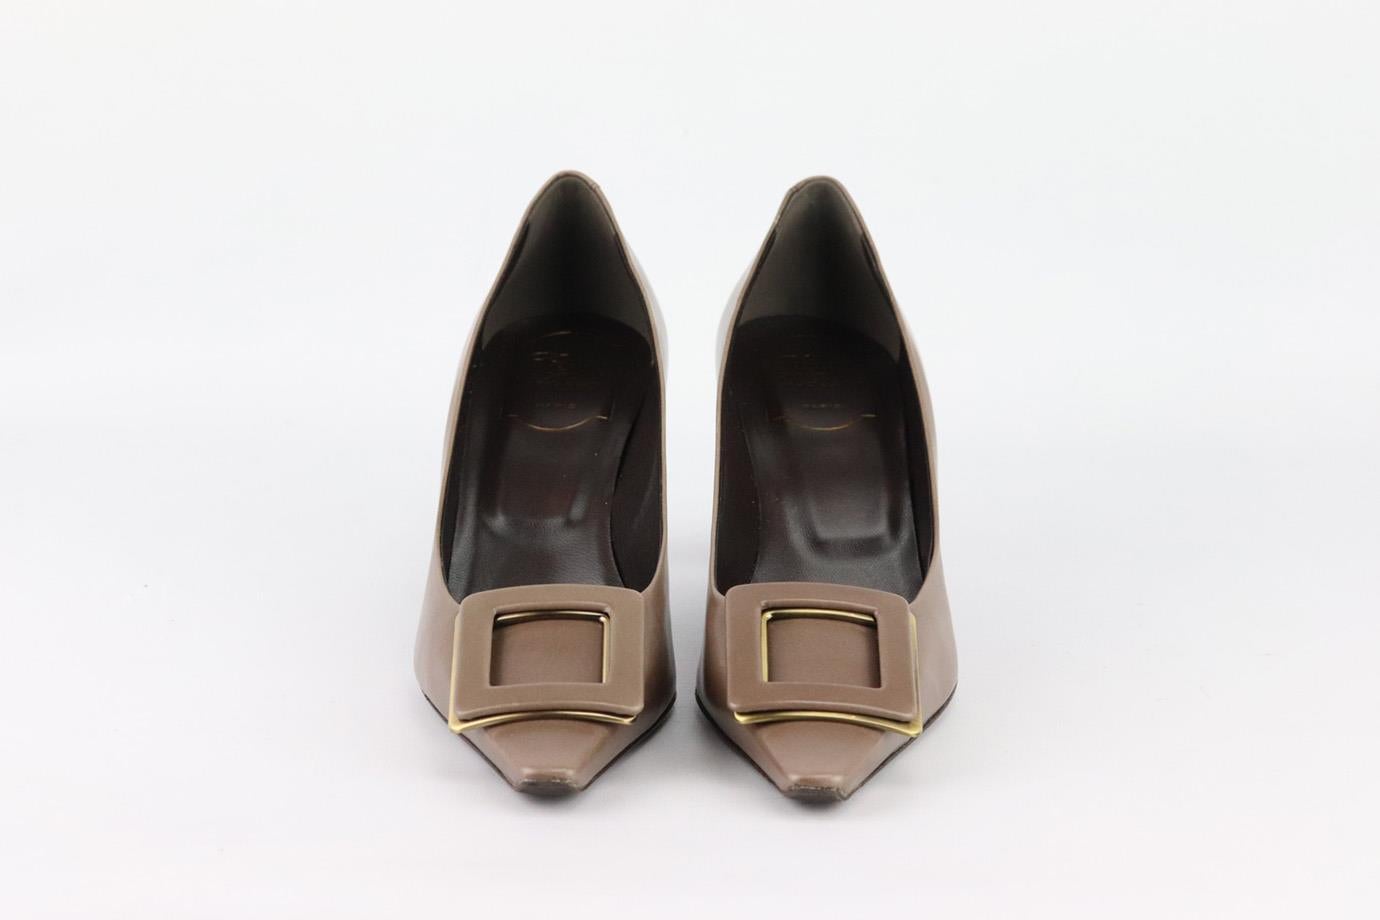 These pumps by Roger Vivier are an elegant re-creation of the founder's original 1965 design, they're made from taupe matte leather and embellished with a tonal signature buckle that tops the pointed toe. Heel measures approximately 63 mm/ 2.5